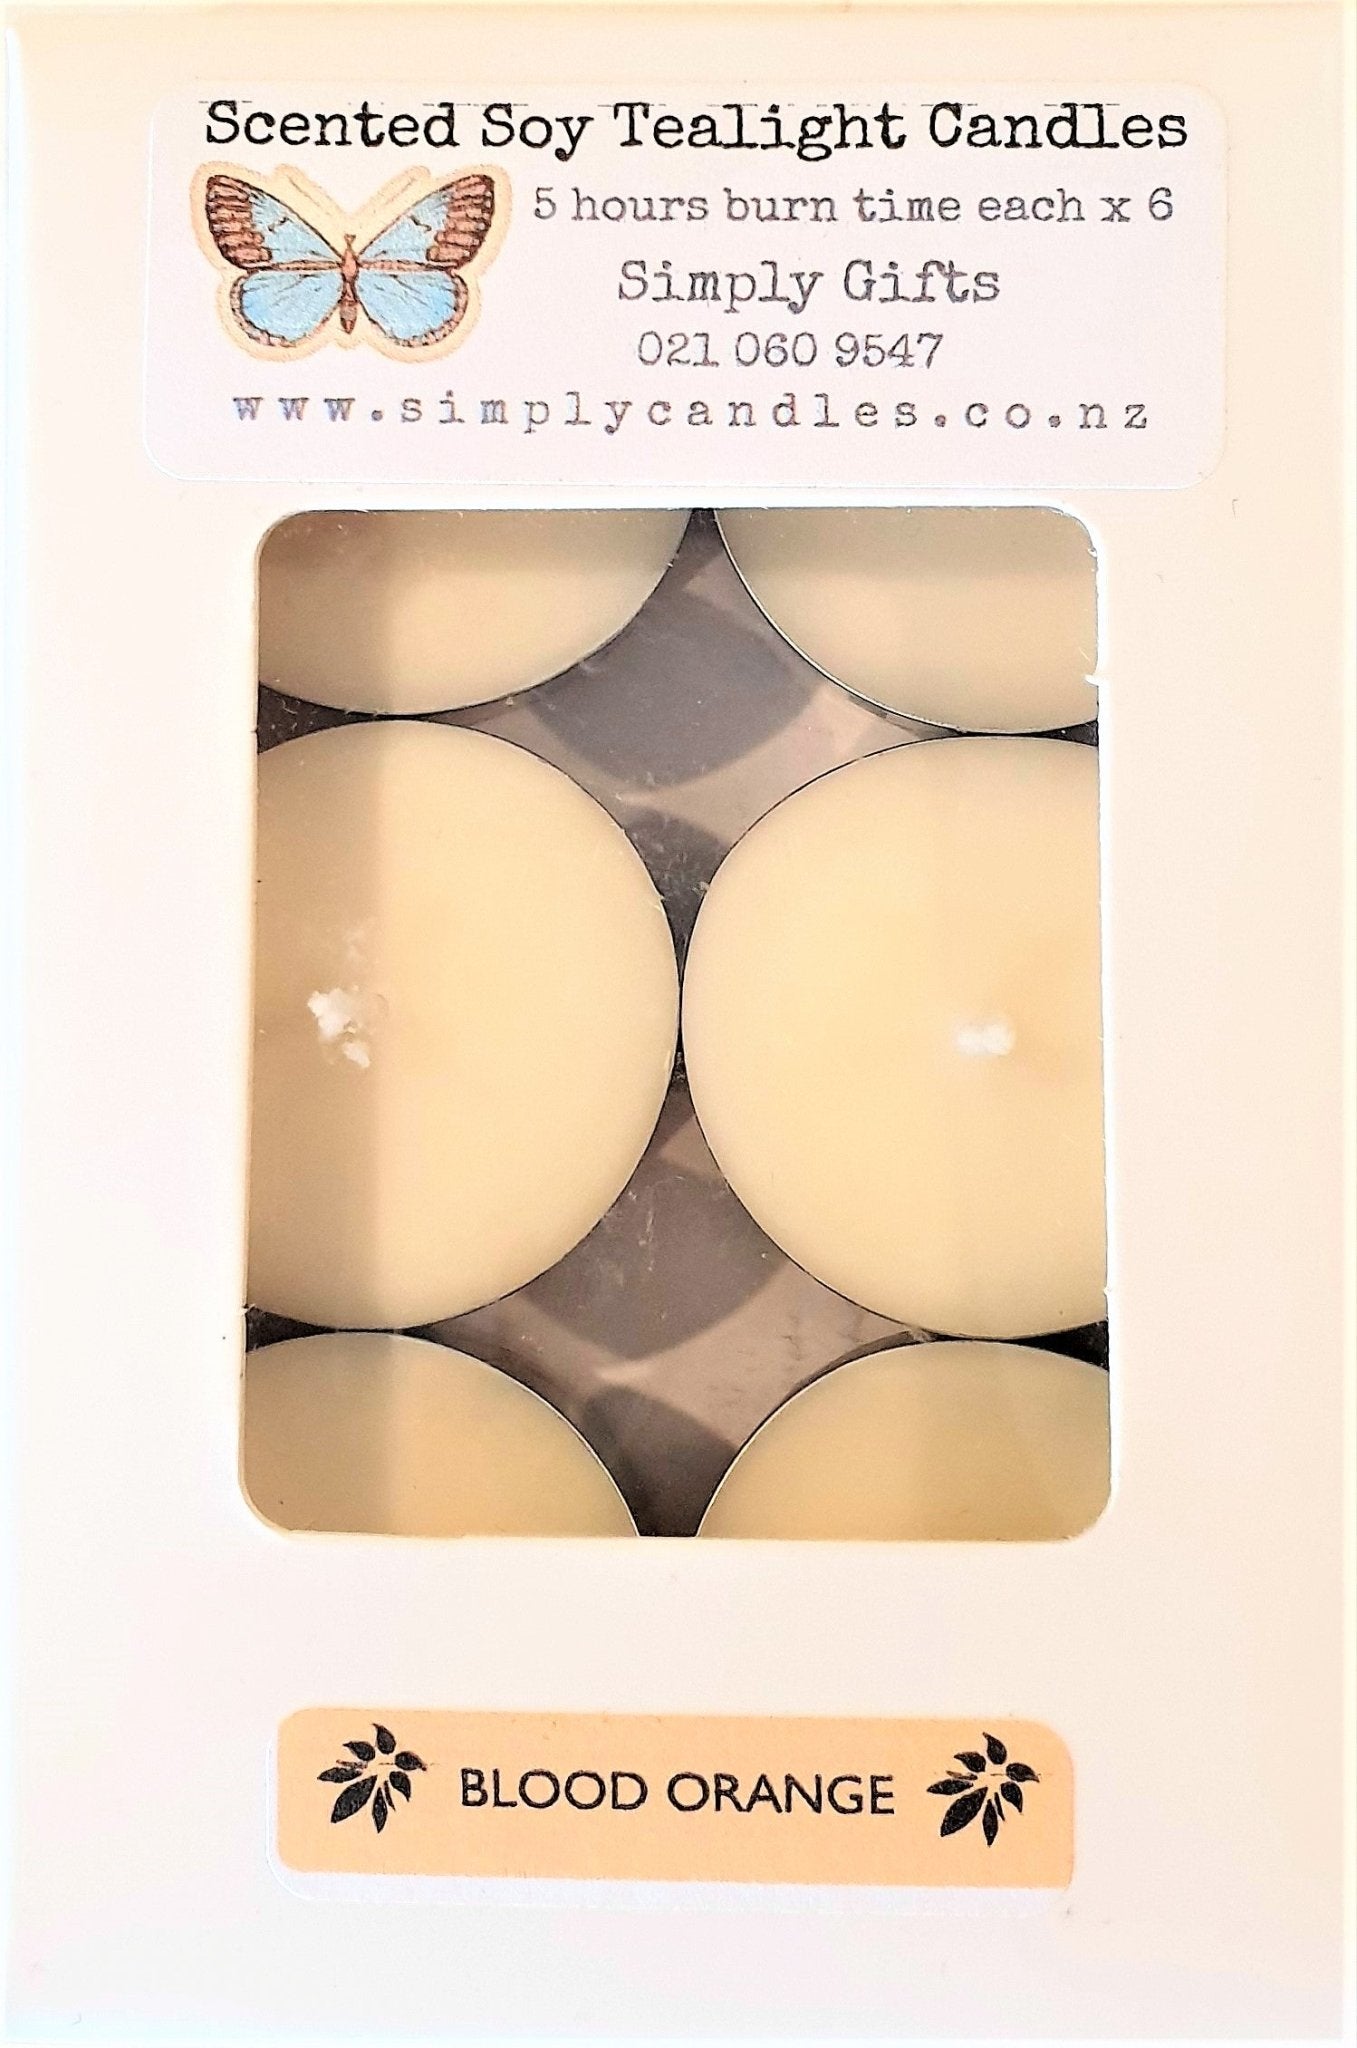 Scented tealight candles - Simply Candles